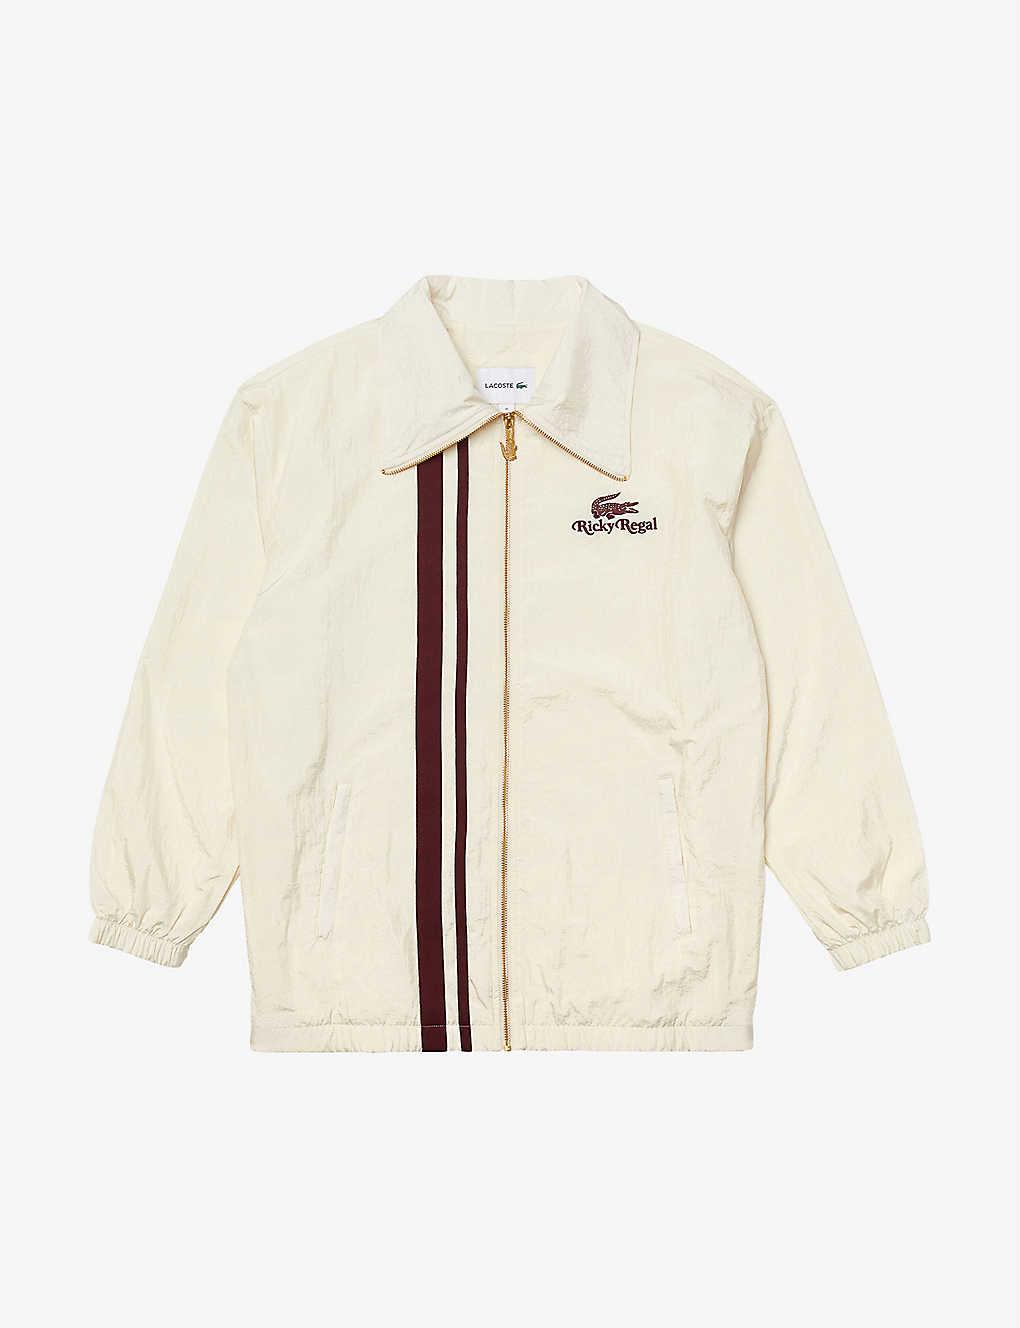 Lacoste X Ricky Regal Striped-trim Woven Coach Jacket in Natural for Men |  Lyst Australia